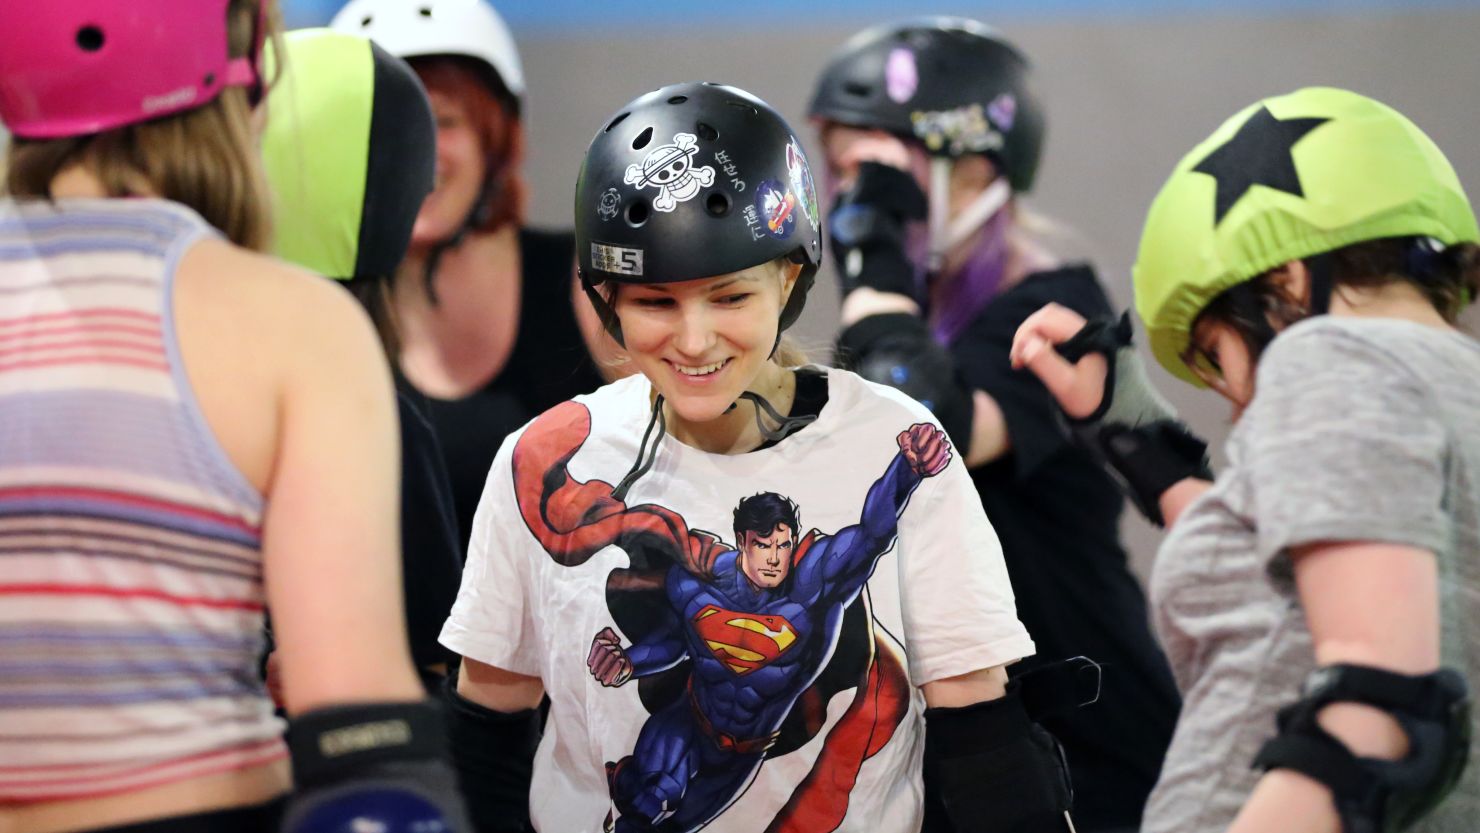 "Roller derby is still underground in Moscow. No one knows what it is and what we do," says Ksusha.